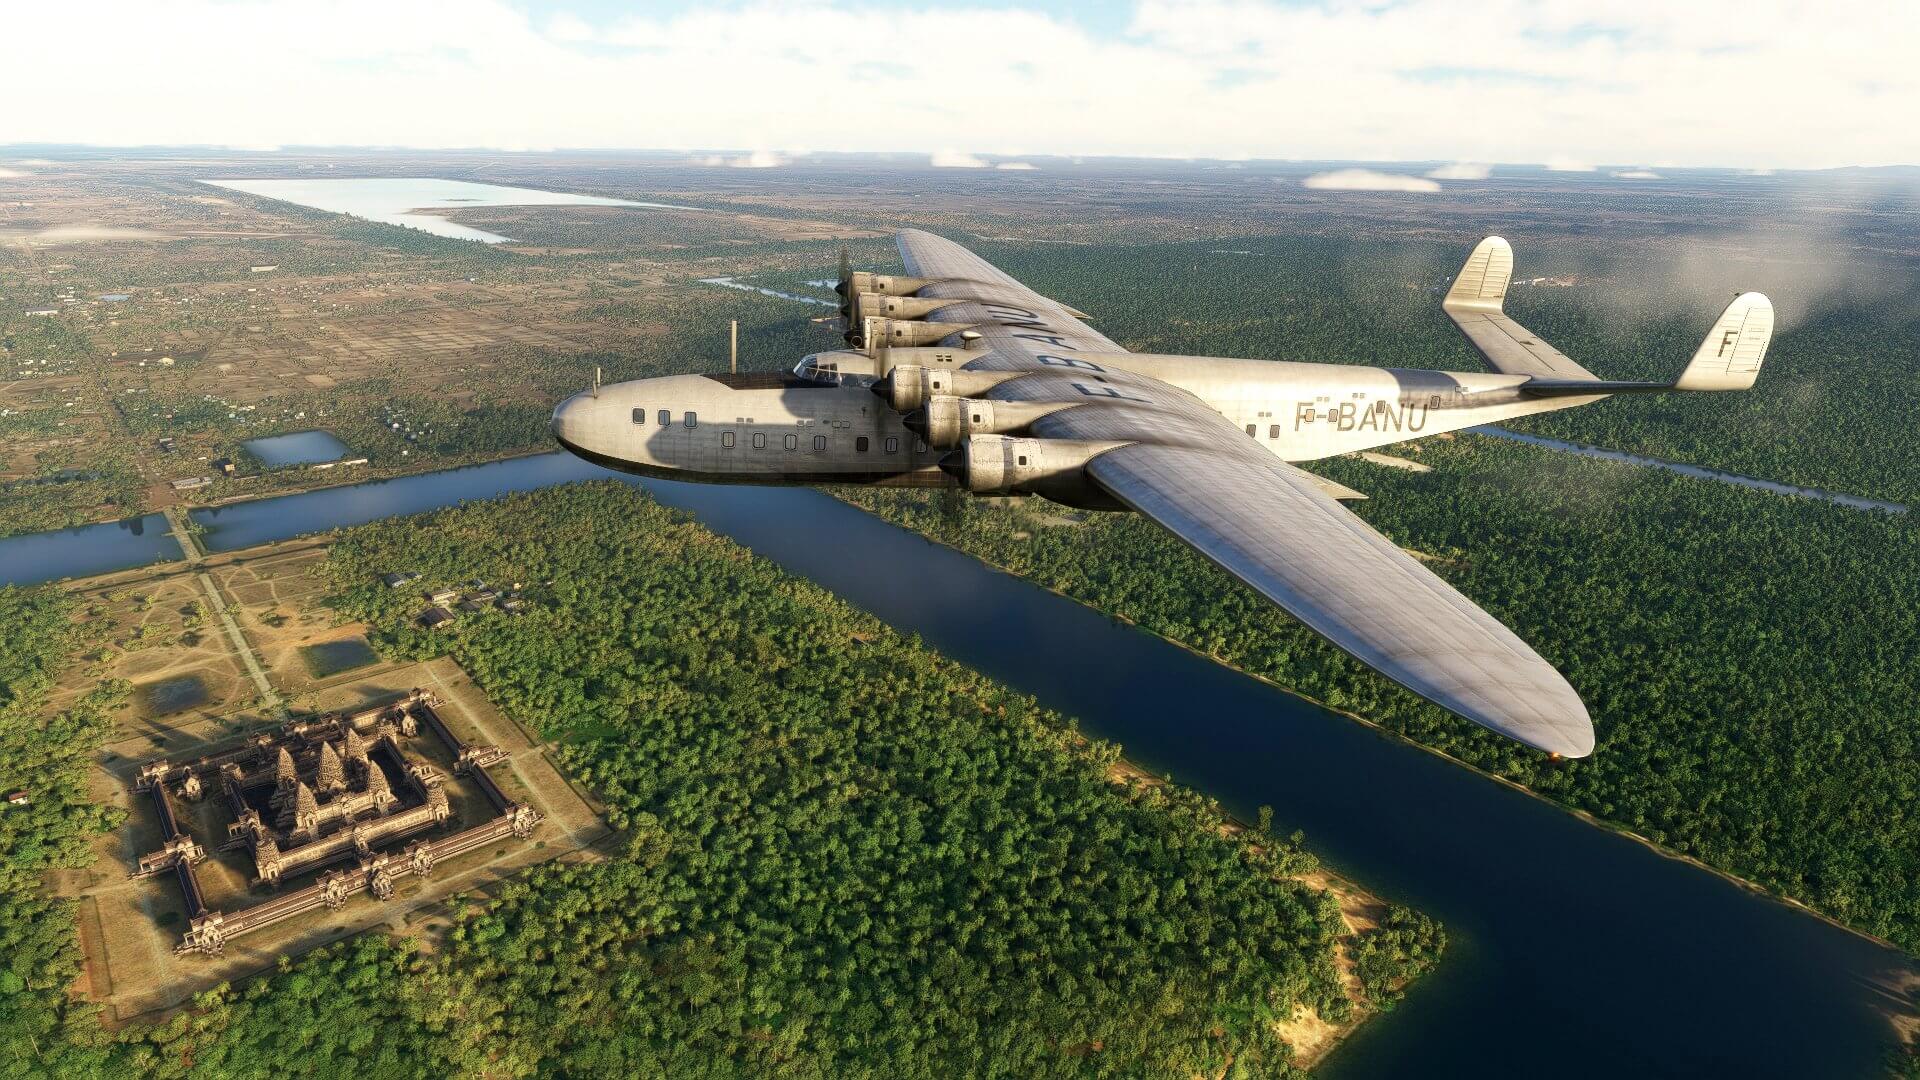 A Latécoère 631 flies over an ancient monument with the sun reflecting brightly off of its fuselage and wings